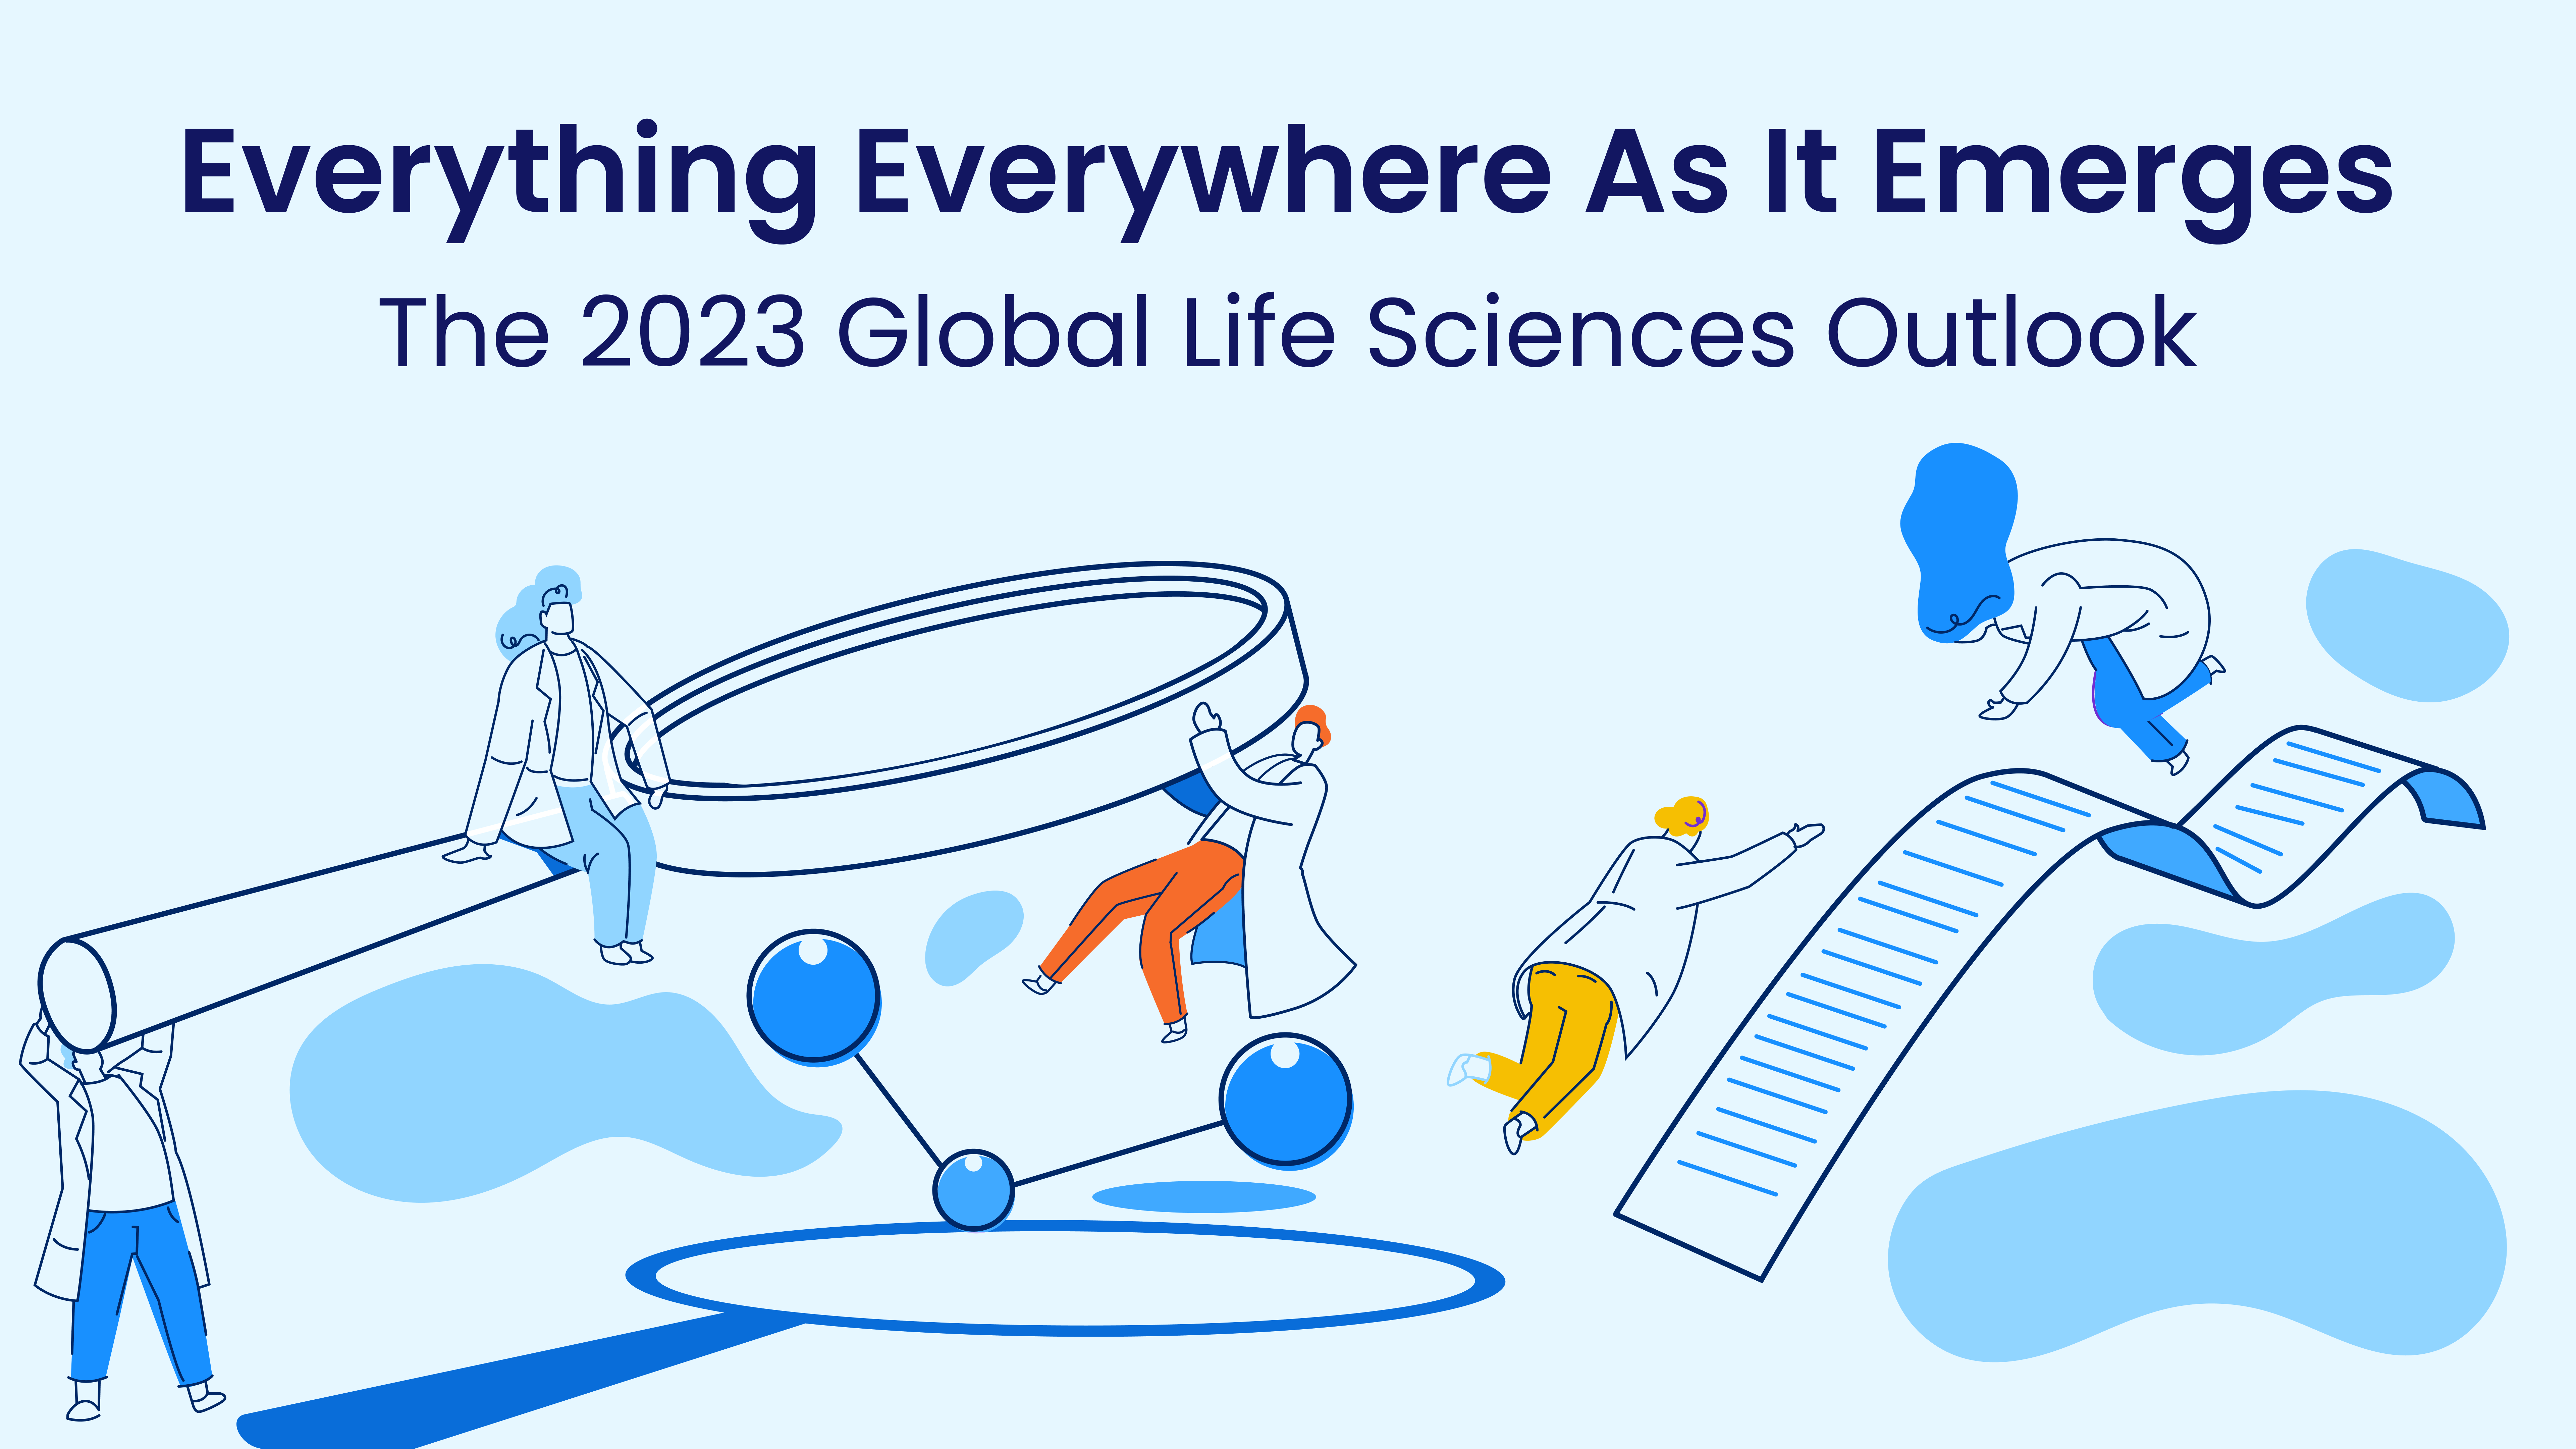 The 2023 Global Life Sciences Outlook